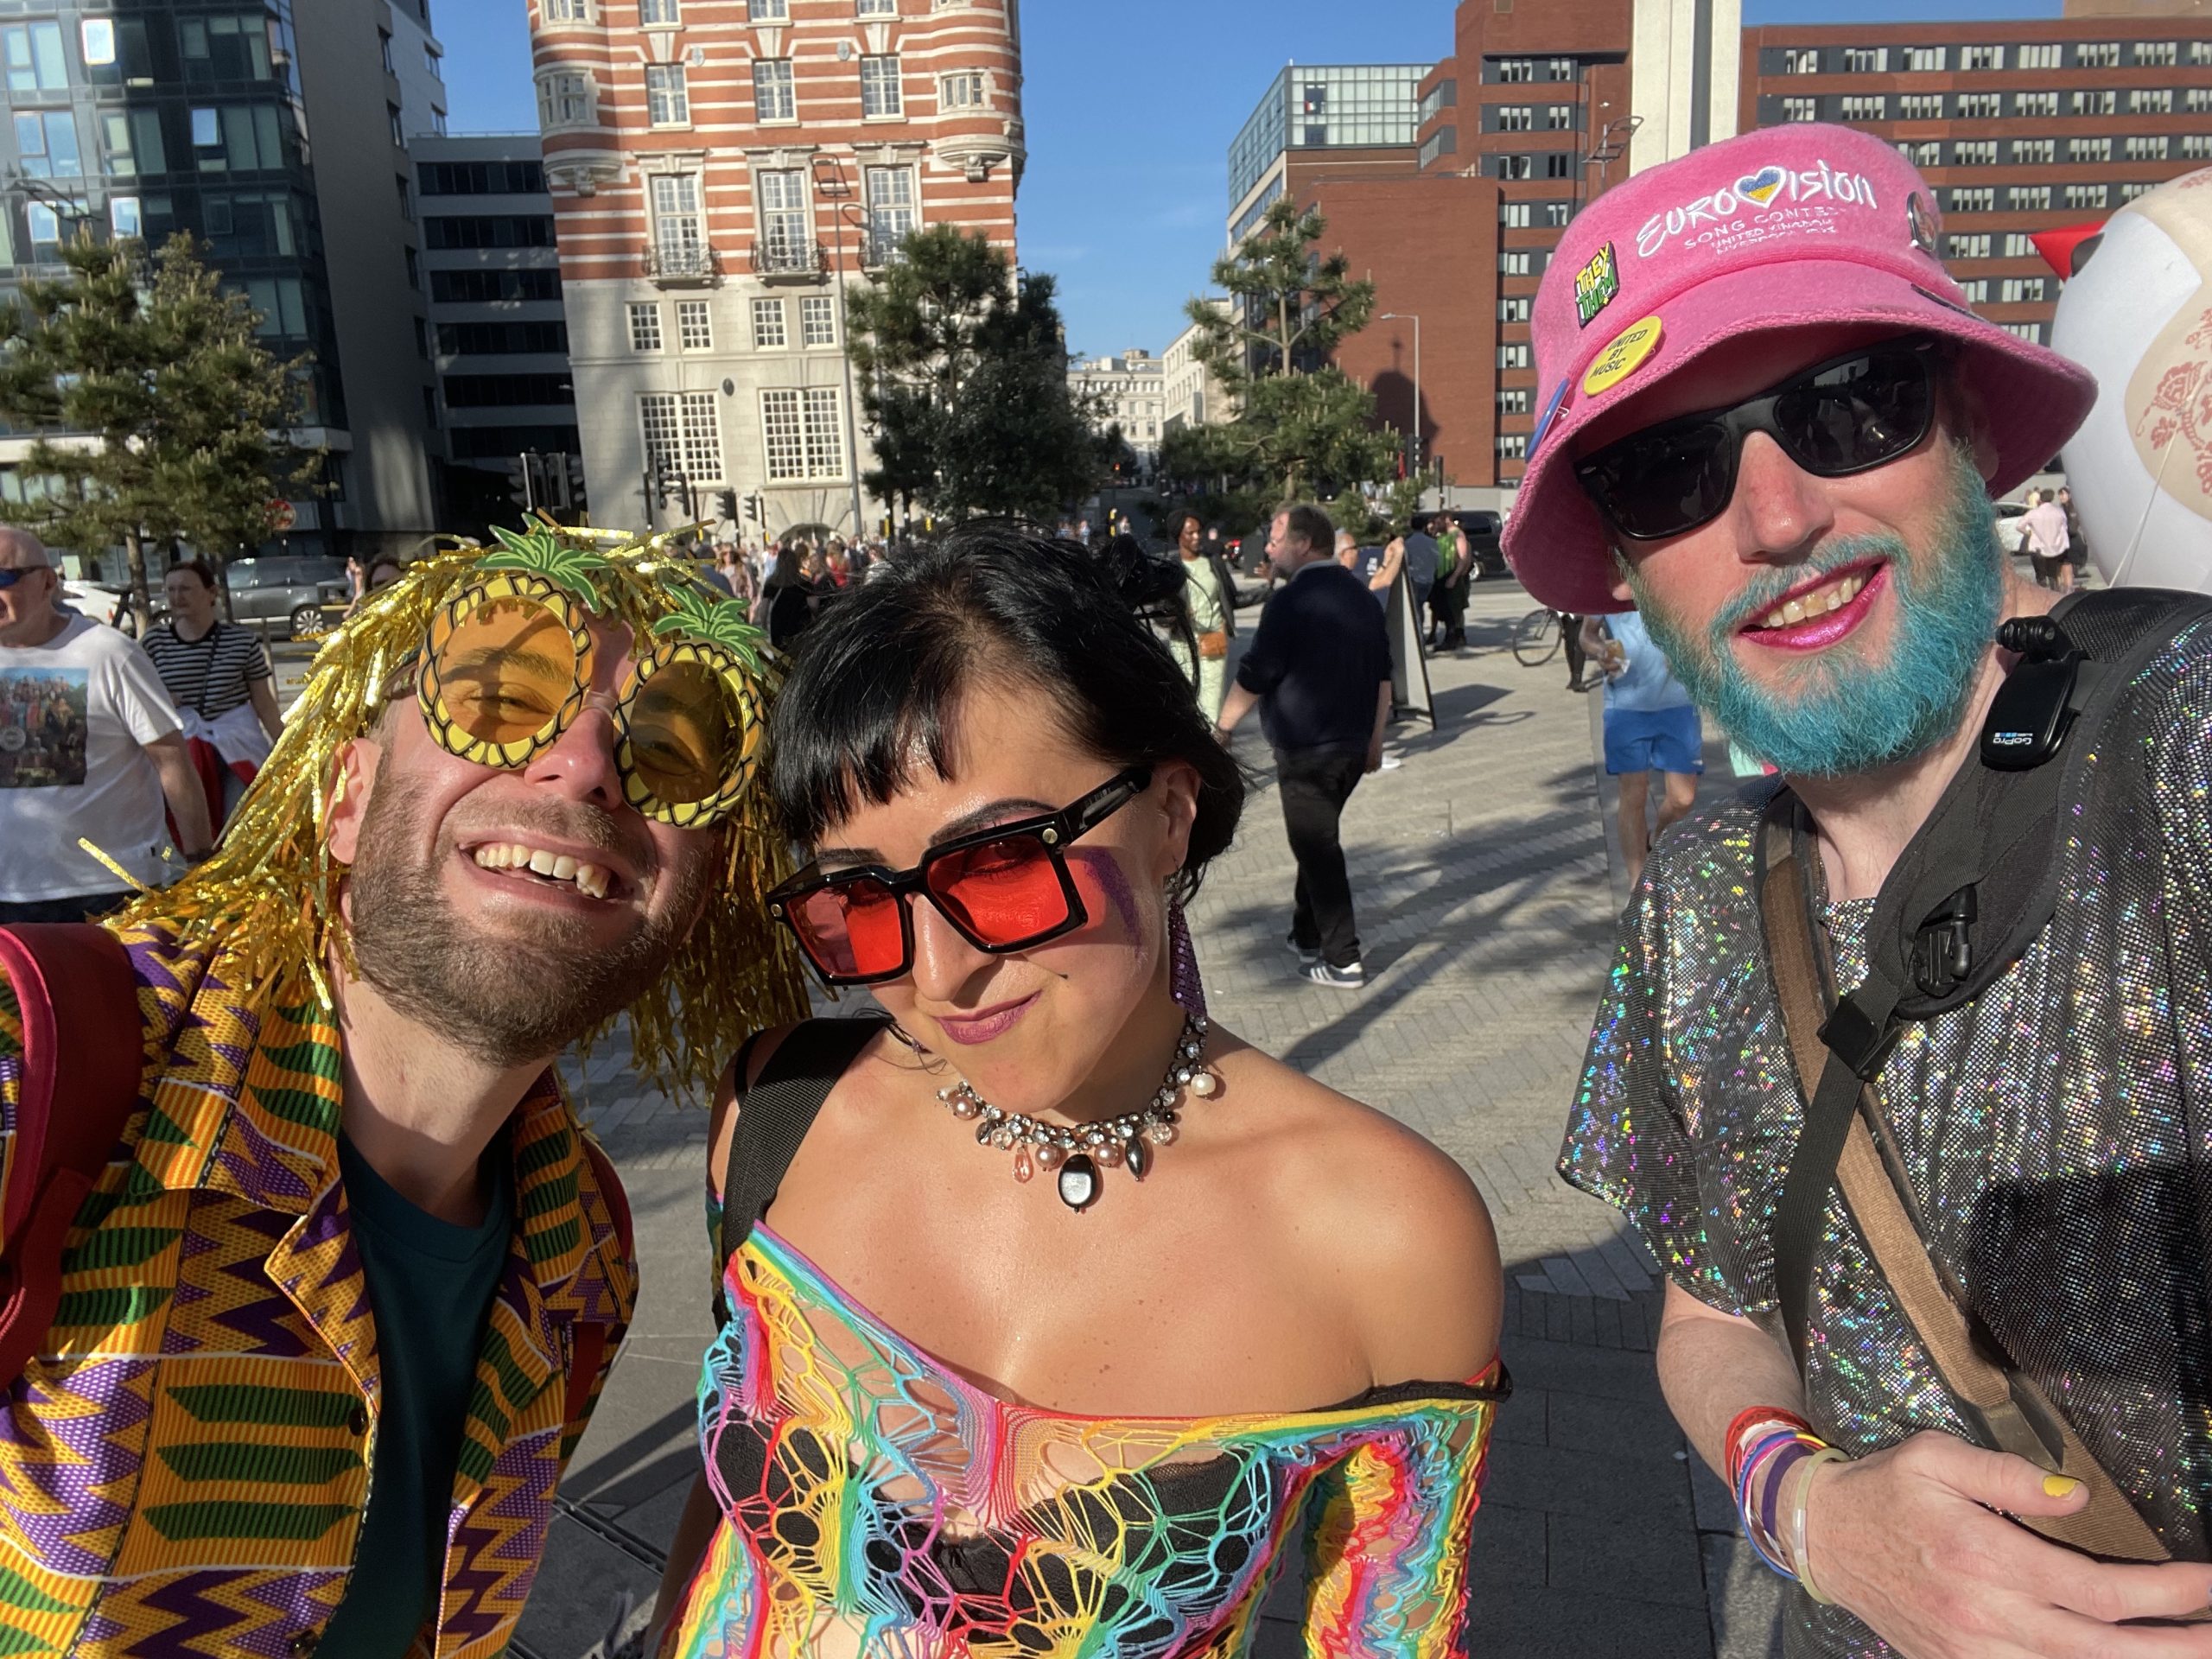 Non-binary person on the right in a sparkly dress, with blue beard and pink hat. Couple on the left in rainbow colours. Both smiling to camera.